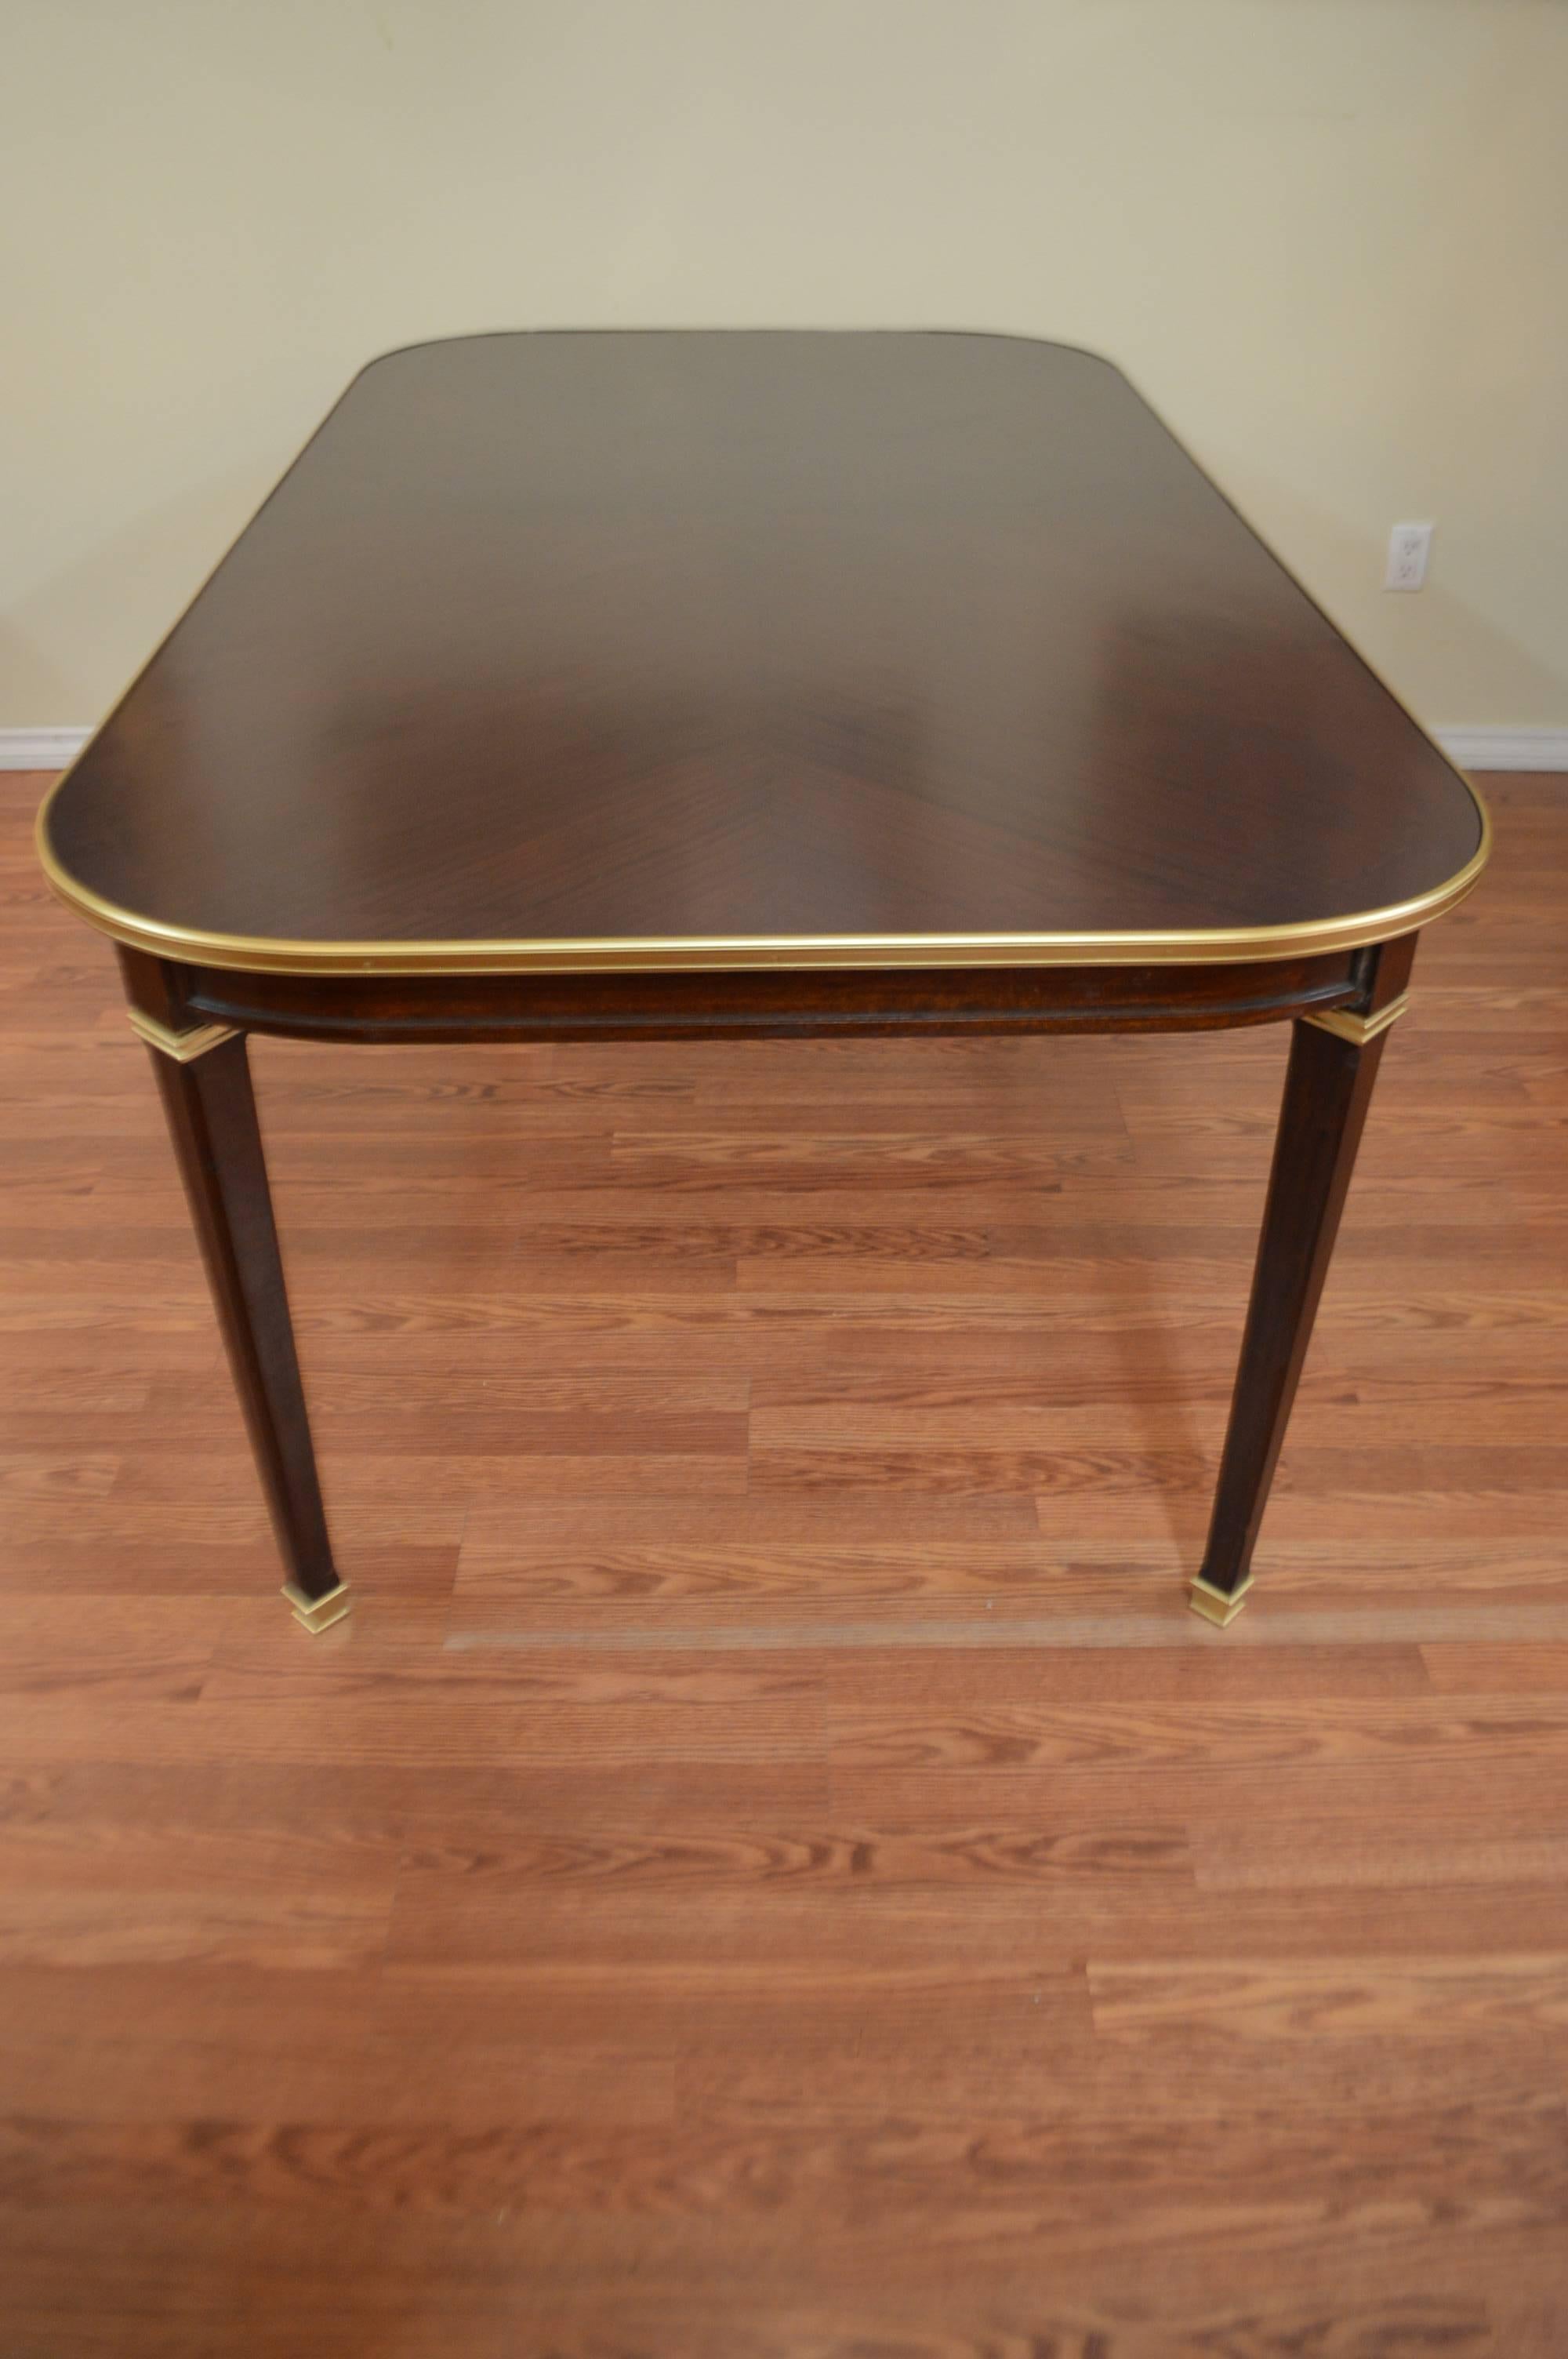 Elegant Directoire style walnut dining table, the inlay pattern top has been expertly refinished. There are gilded bronze molding around the edge of the table as well as the legs and the sabots.